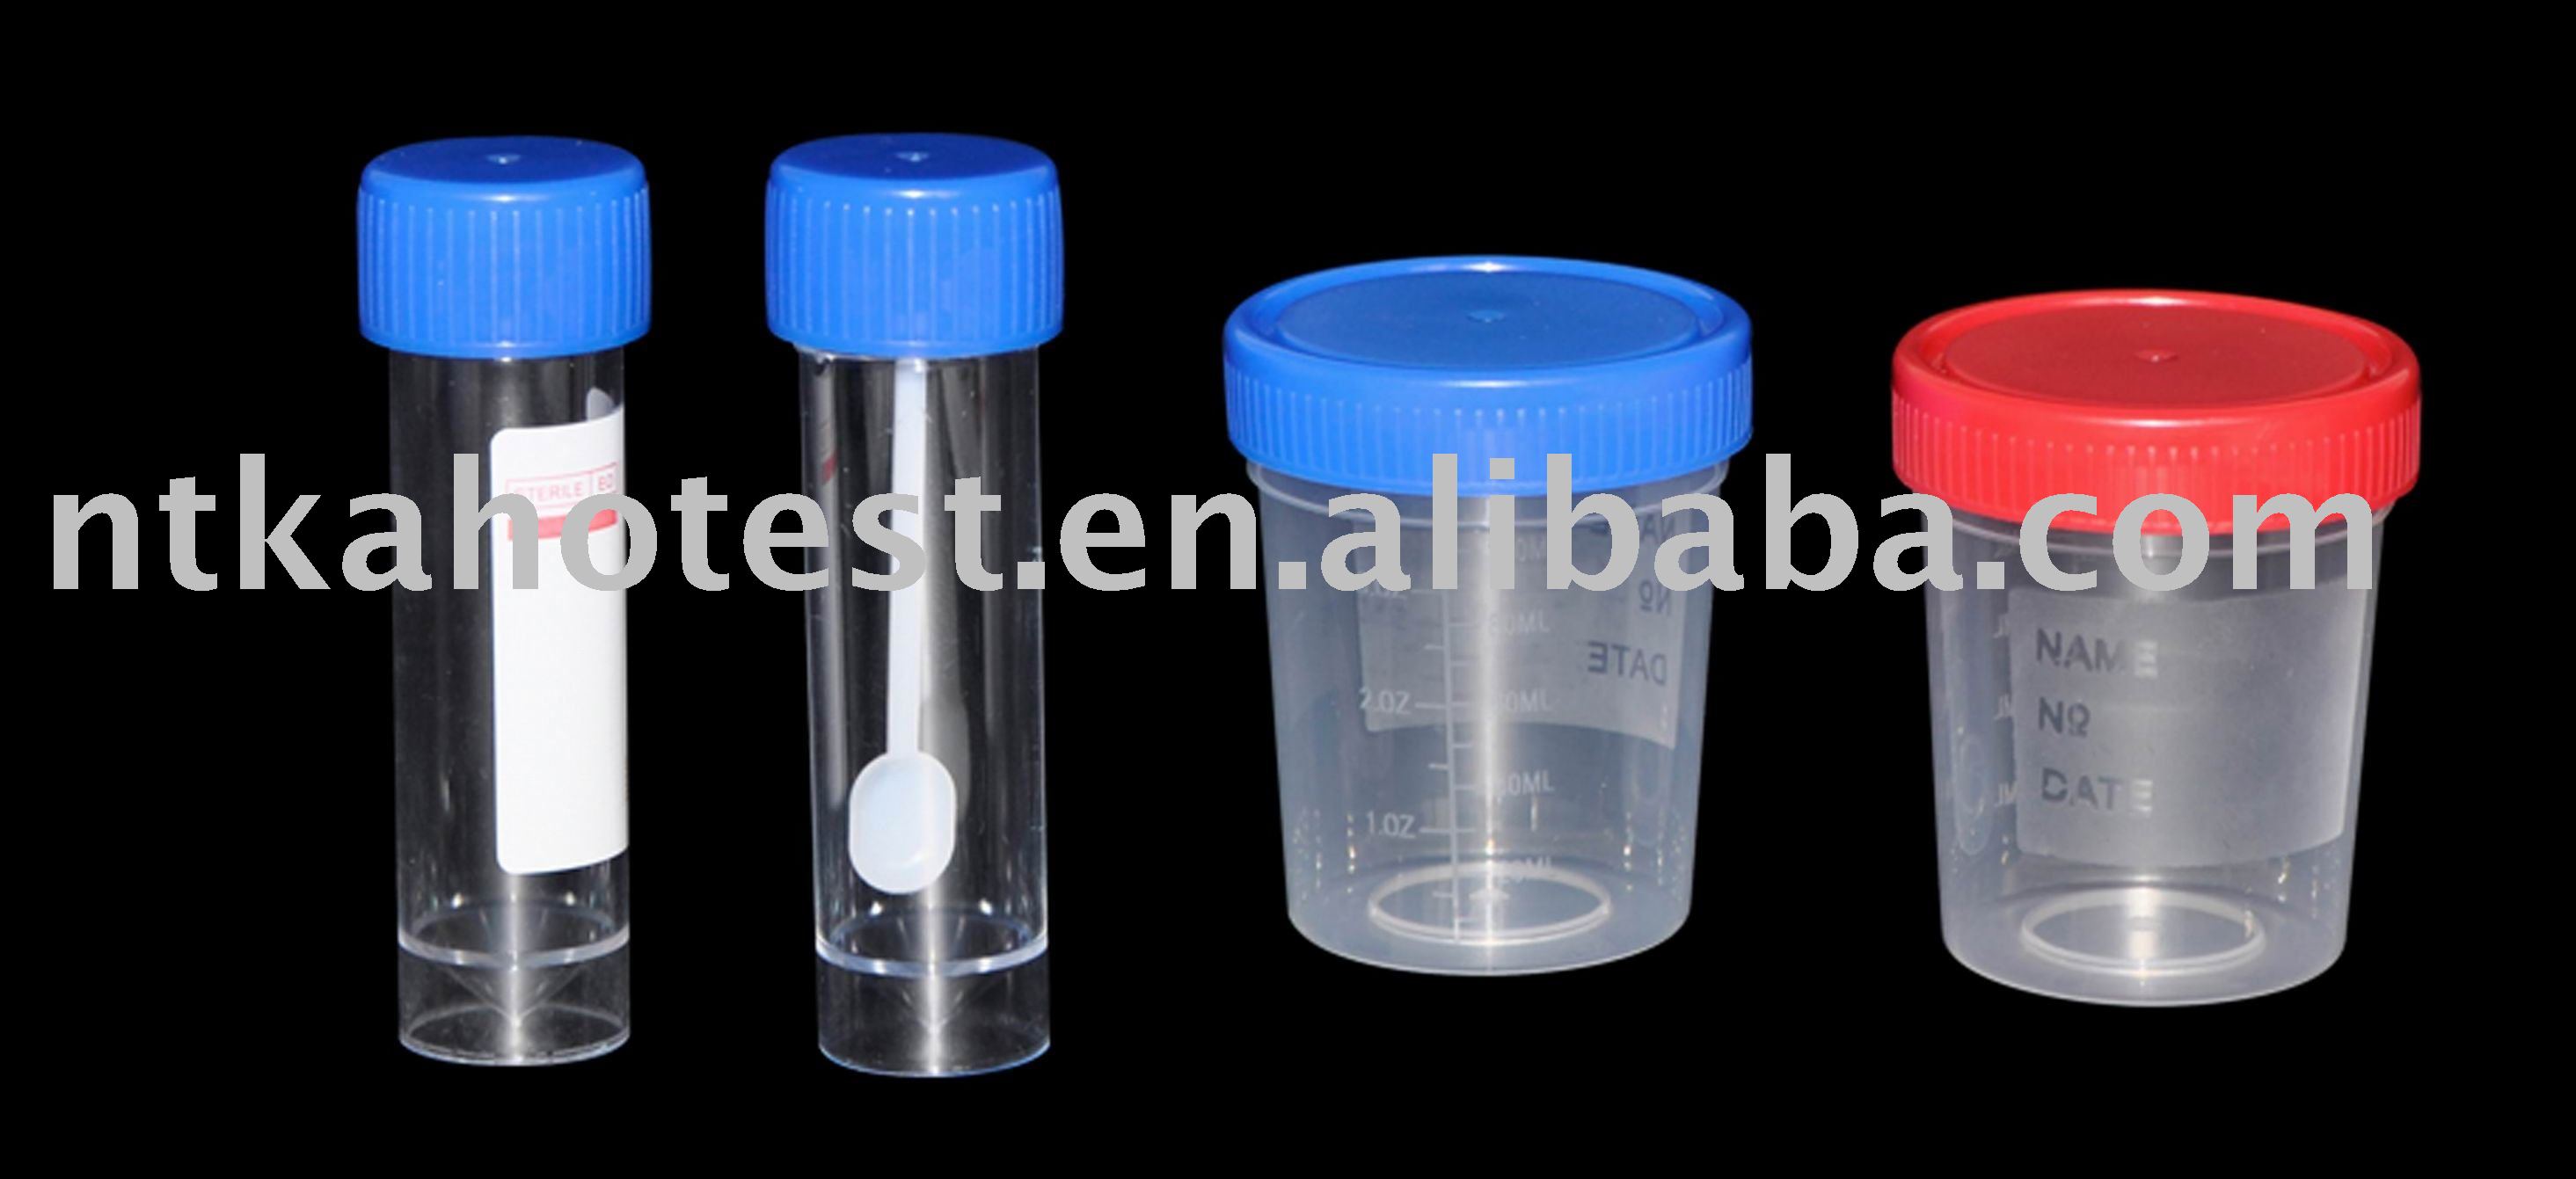 urine collection tubes